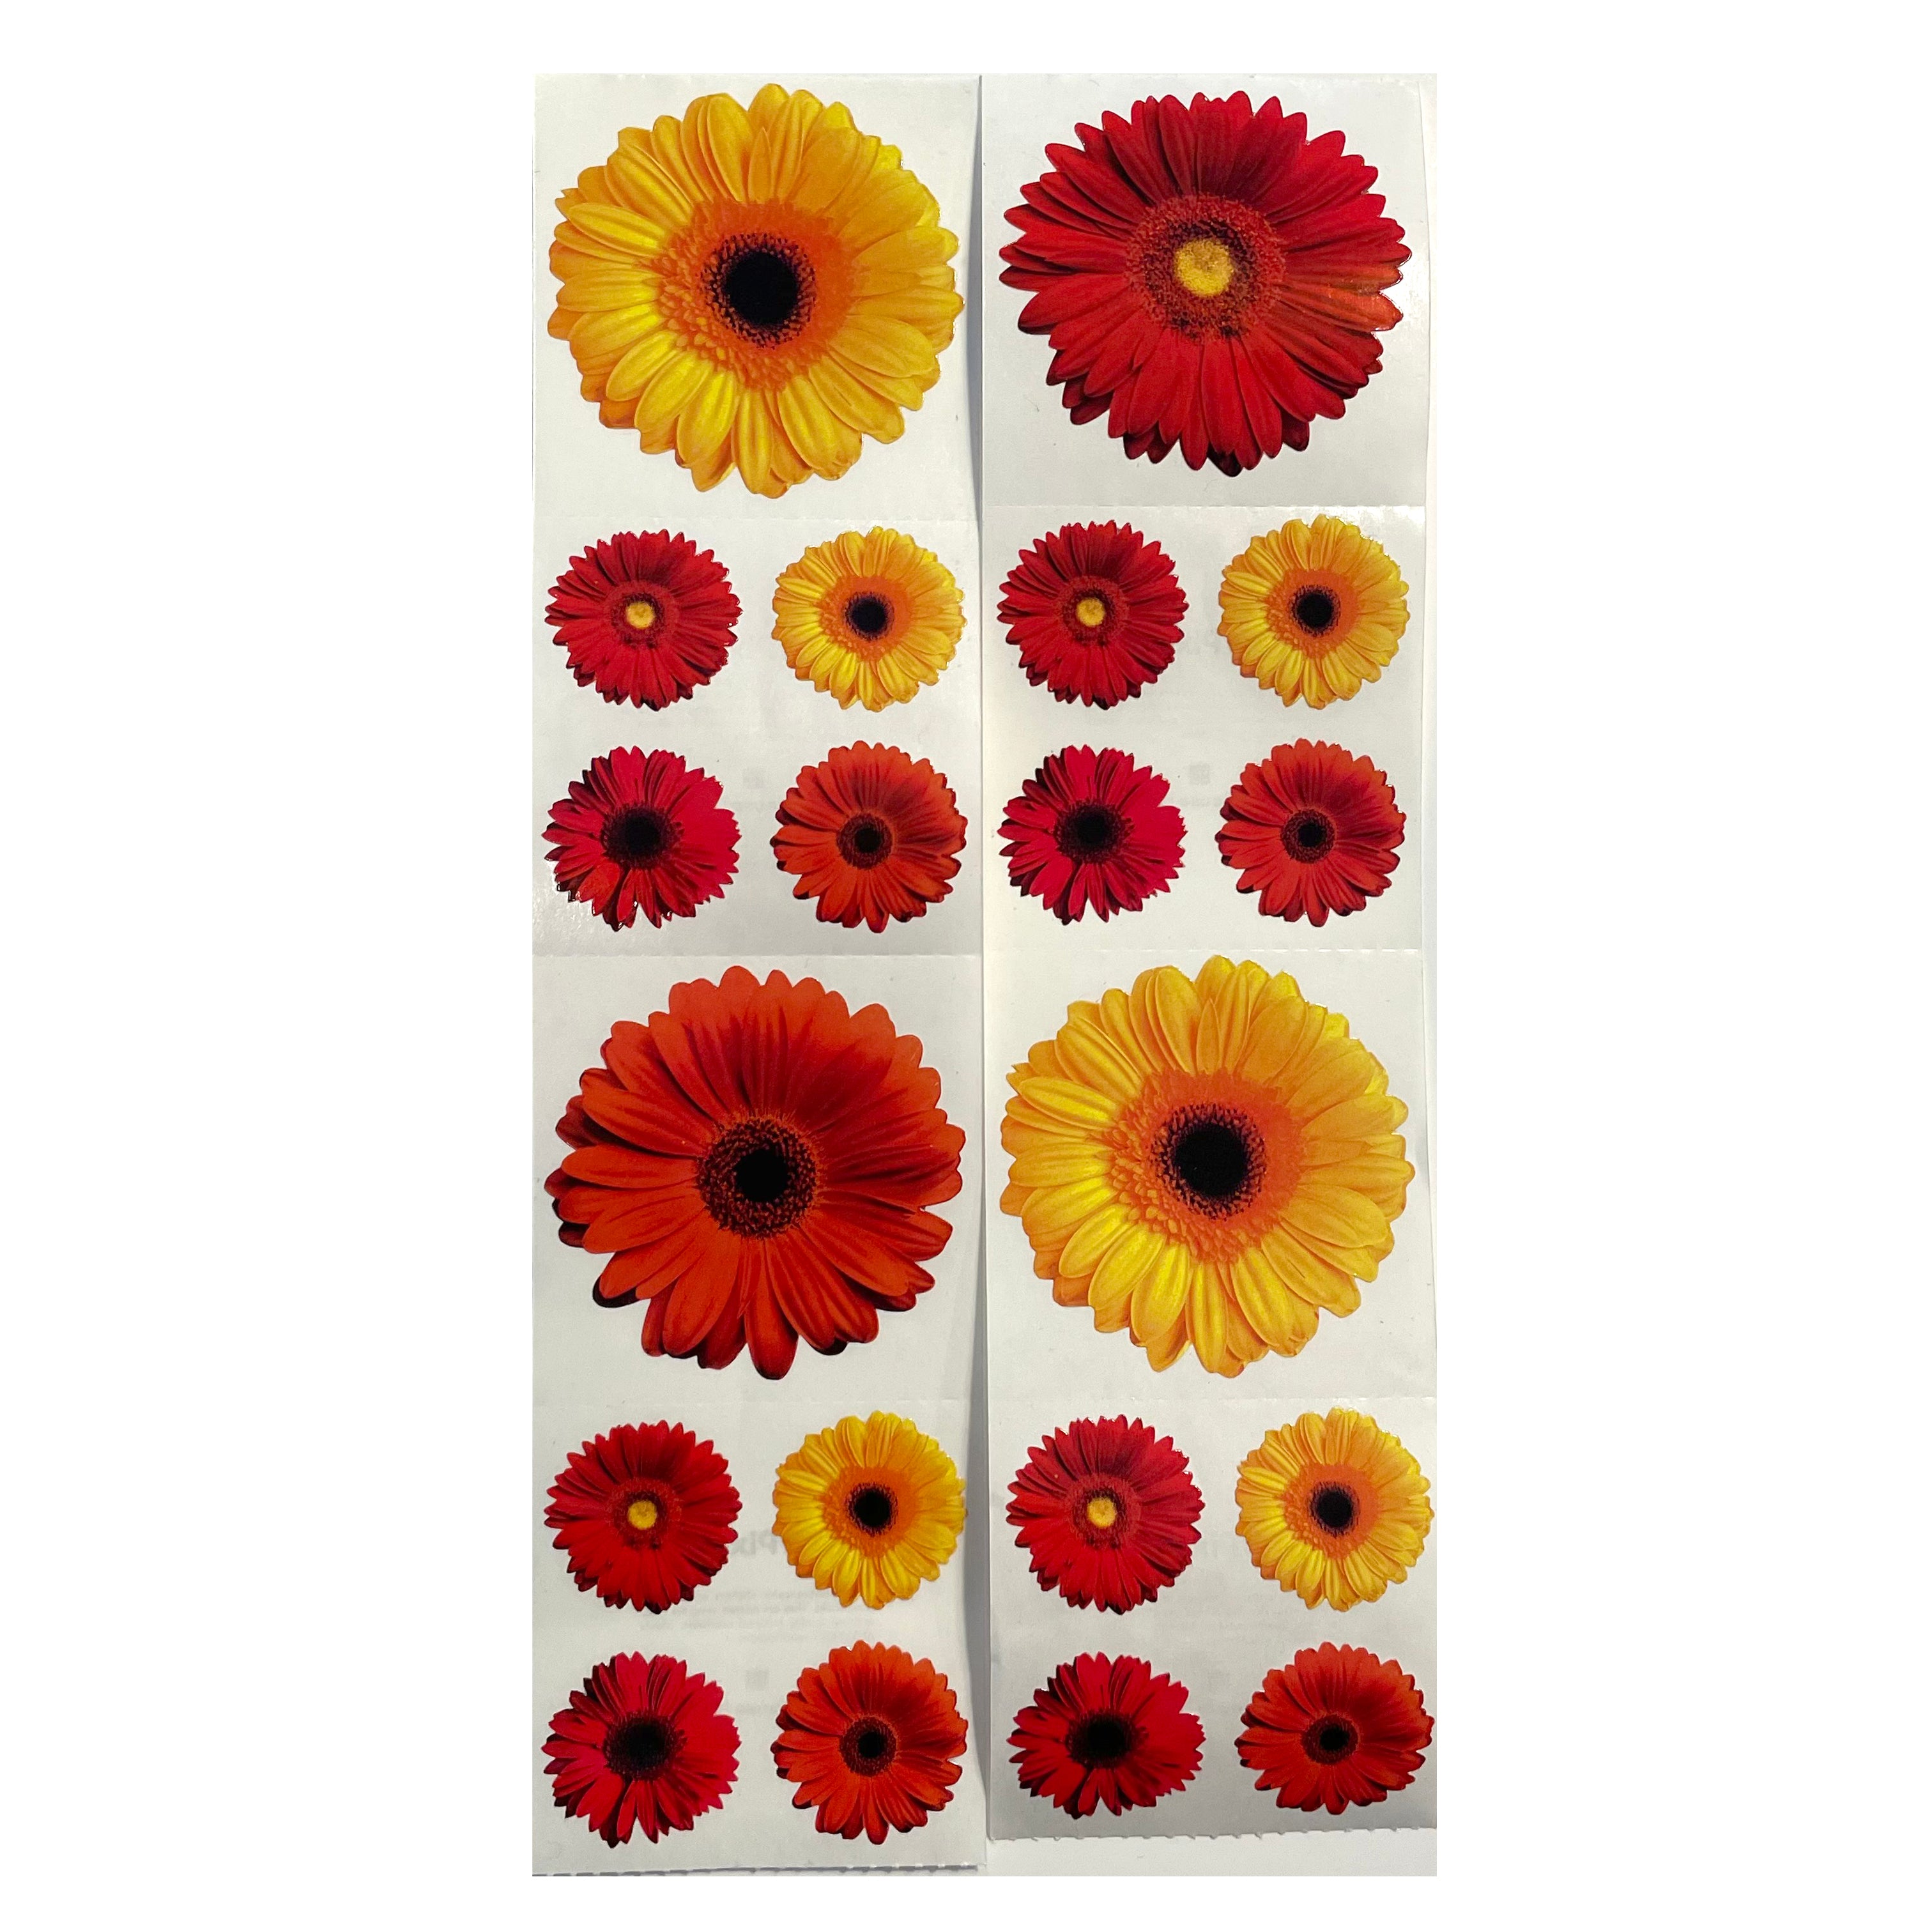 12 Packs: 12 ct. (144 total) Gerbera Daisy Stickers by Recollections™ 